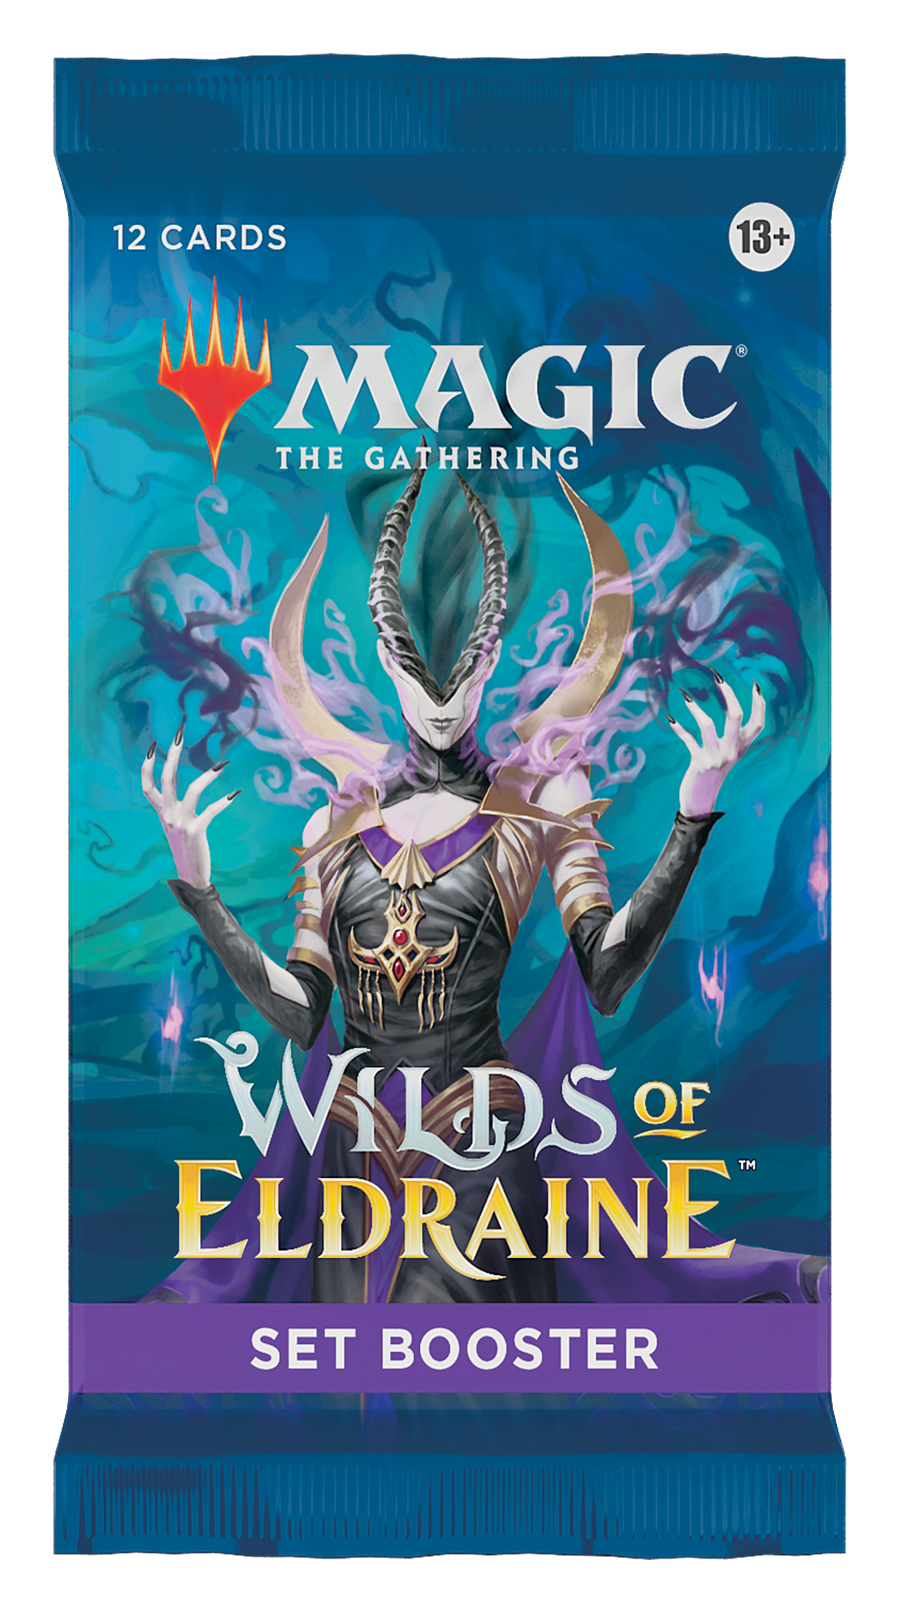 Magic: The Gathering Wilds of Eldraine Set Booster (12 Magic Cards)